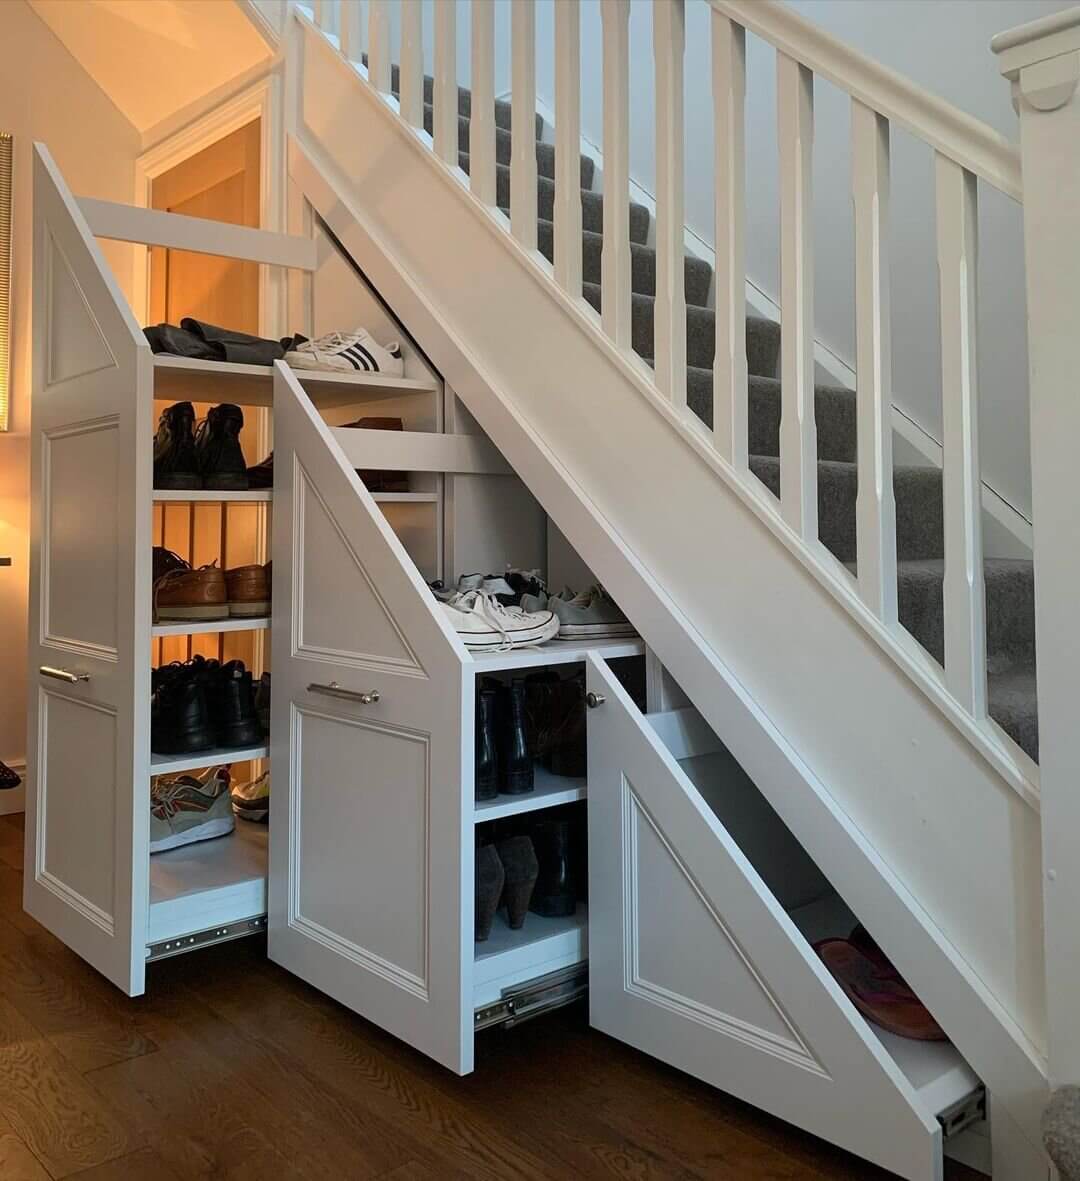 20 Under The Stair Ideas You'll Love - 131